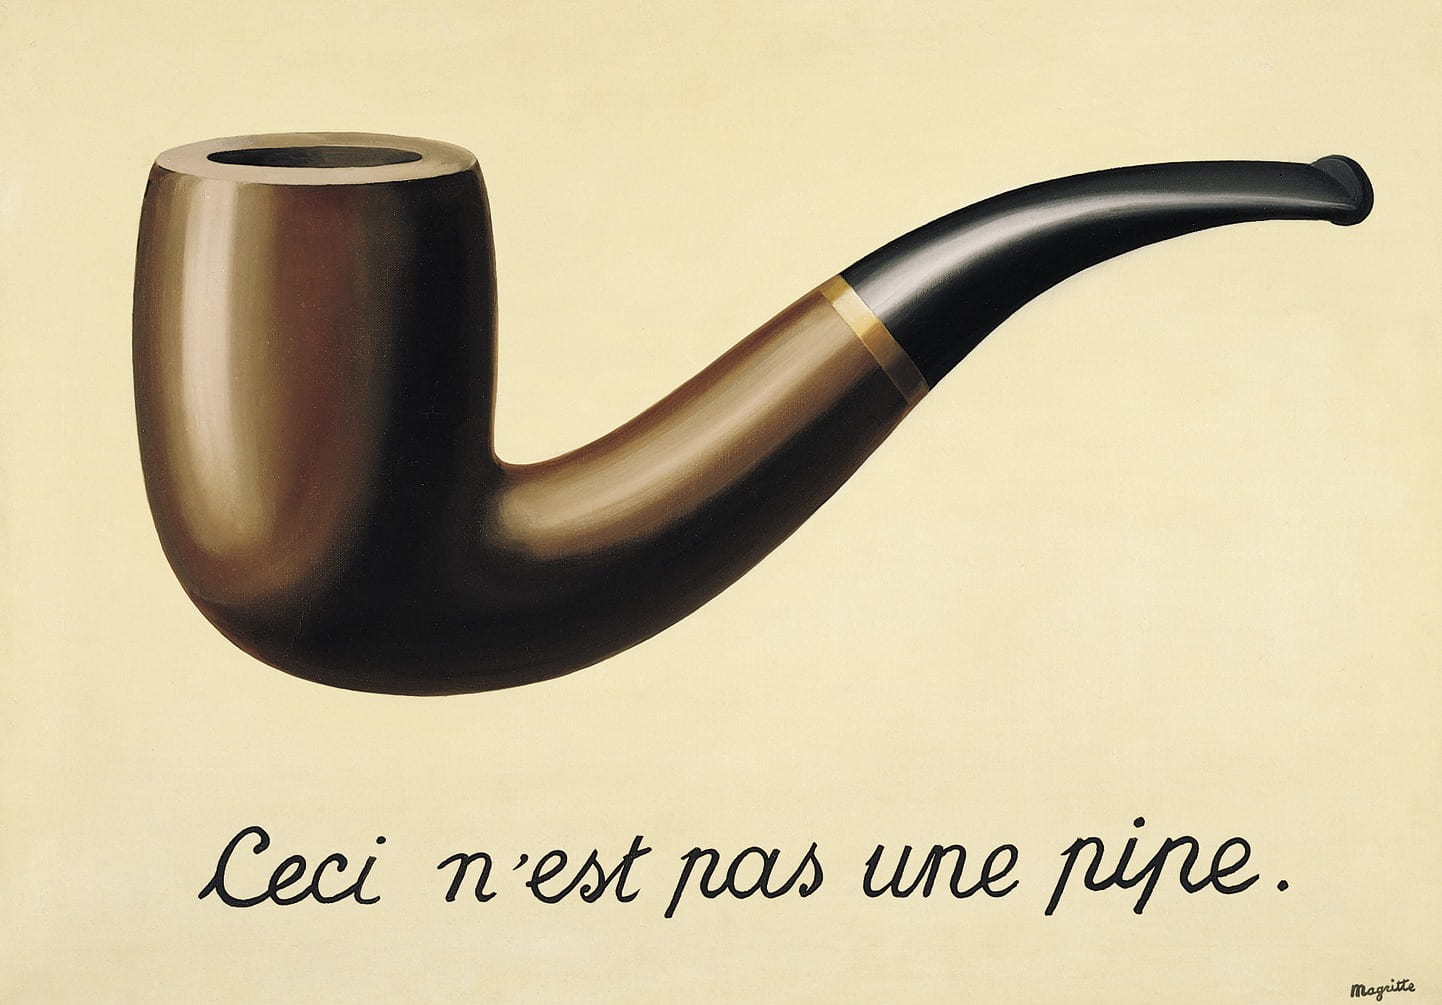 Magritte's "The Treachery of Images," a painting of a smoking pipe captioned with "Ceci n'est pas une pipe"